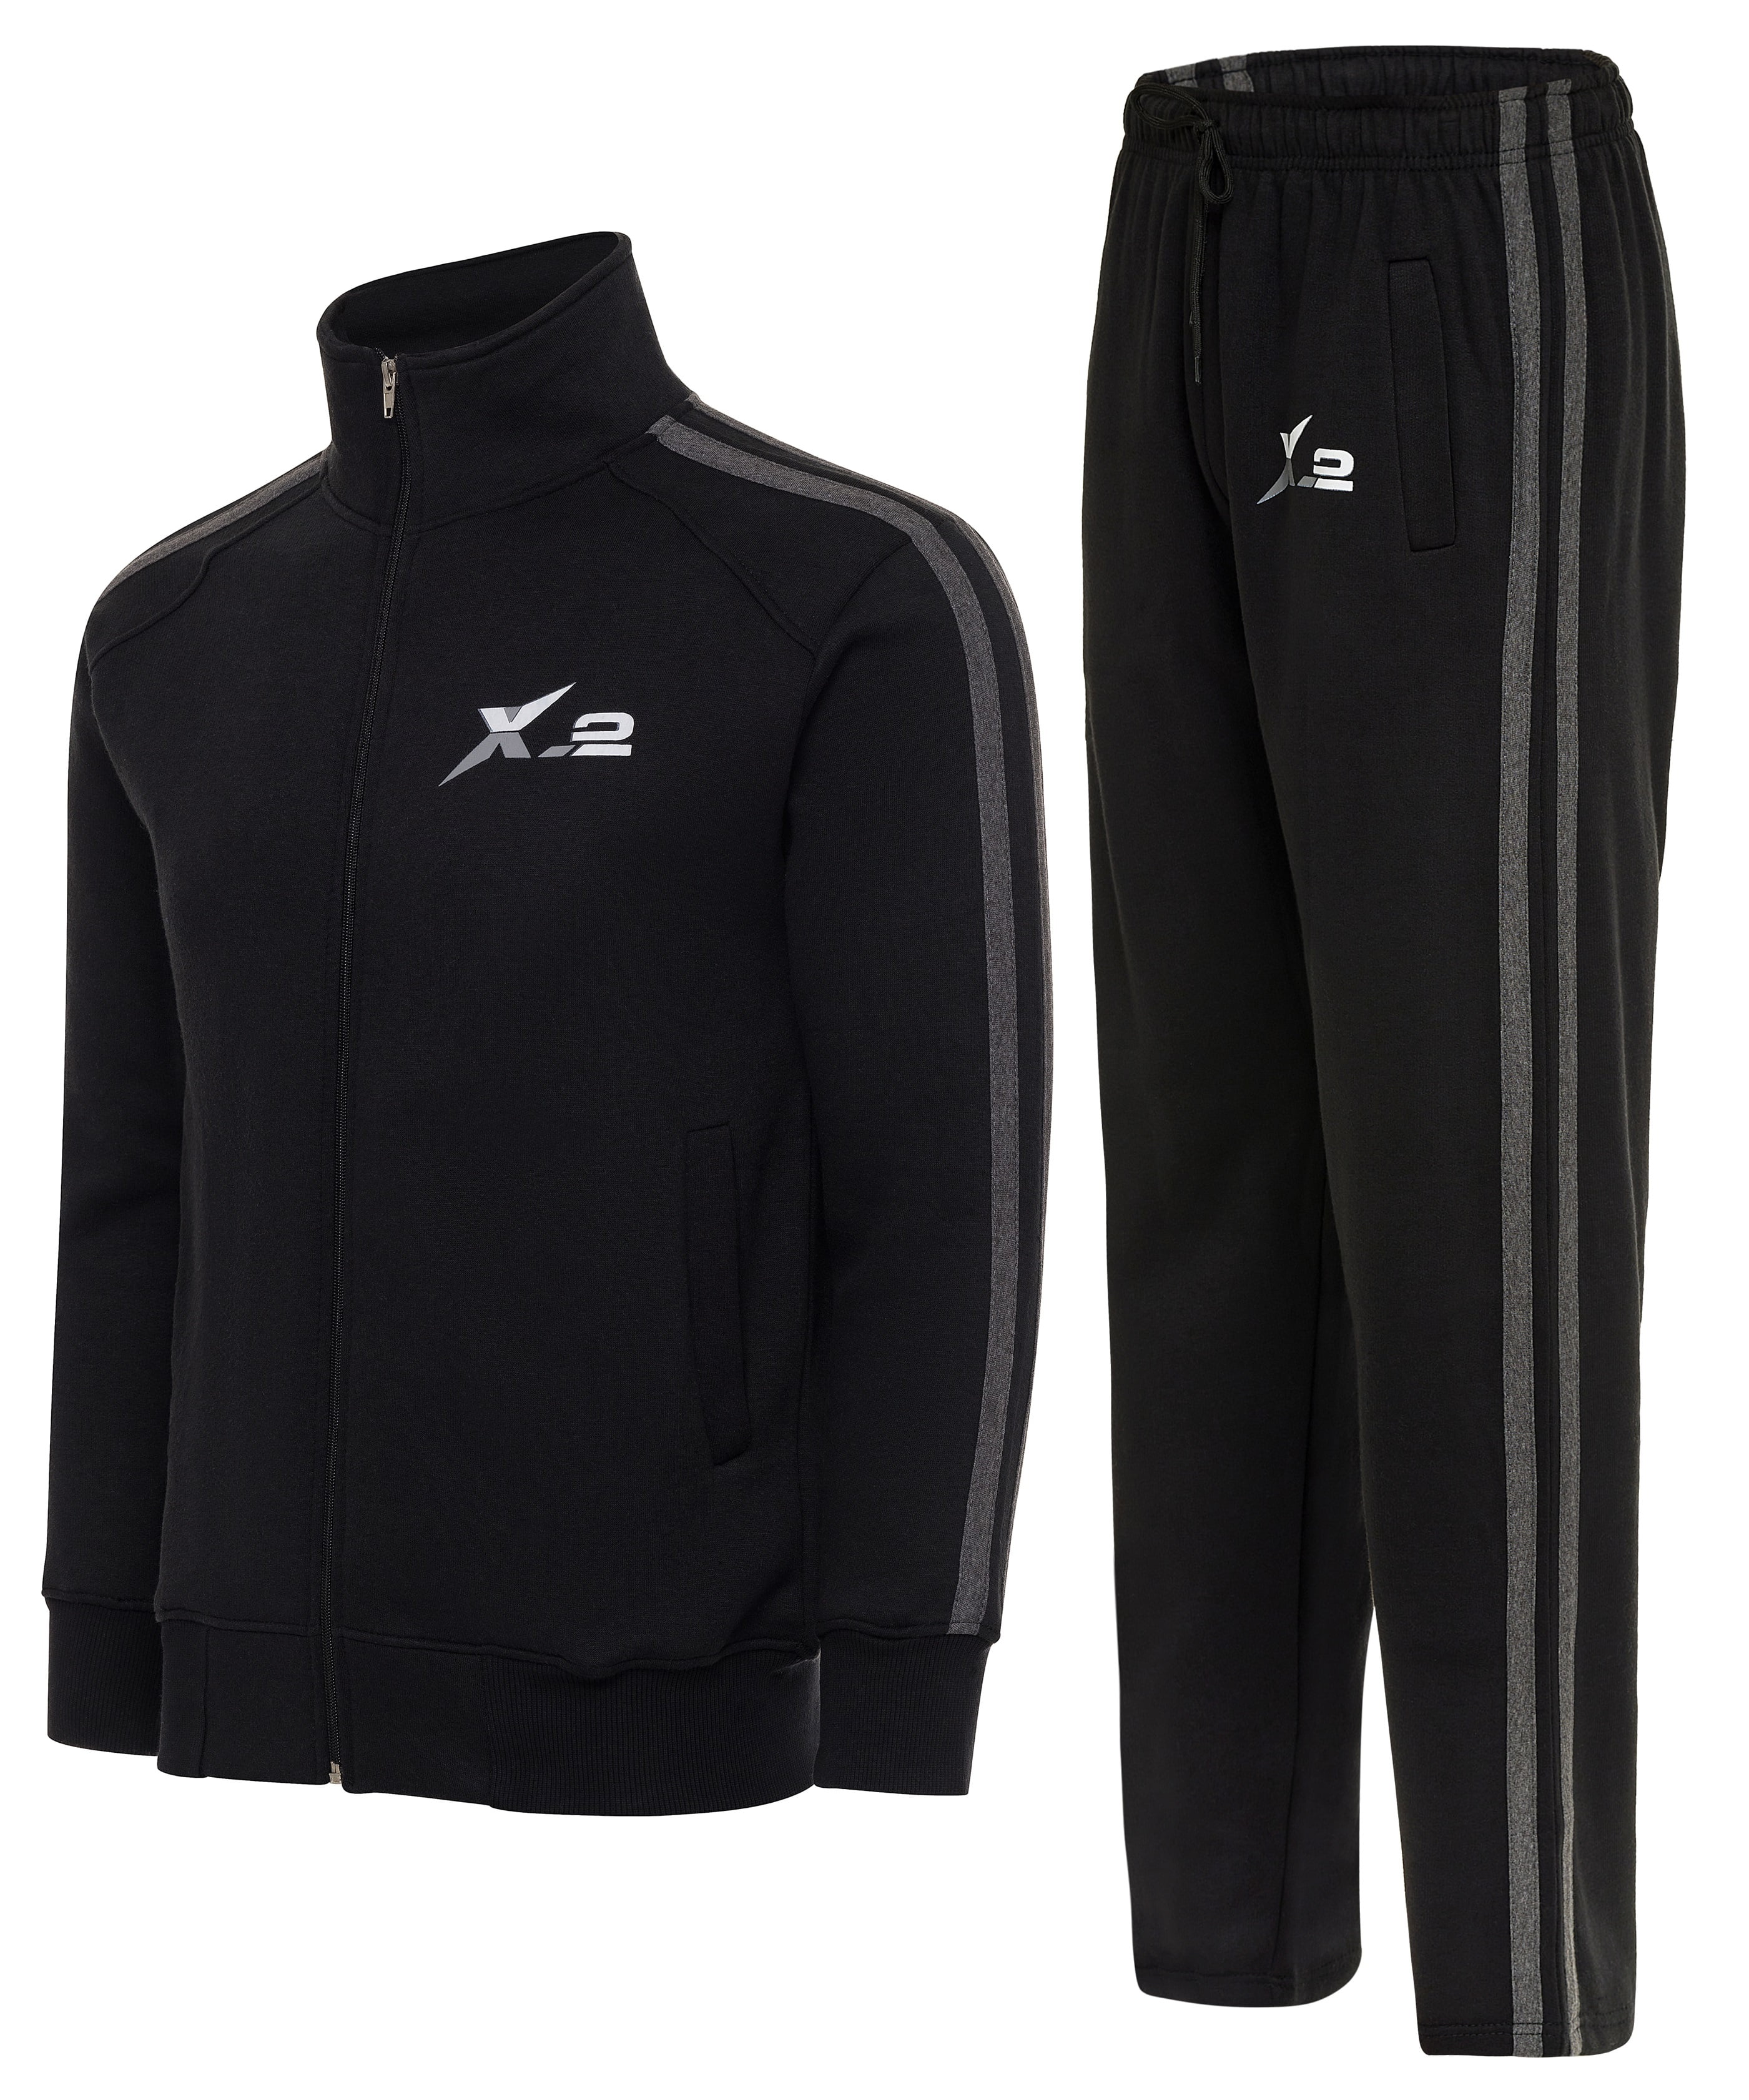 Men's 2 Pieces Tracksuits Running Jogging Sports Suits